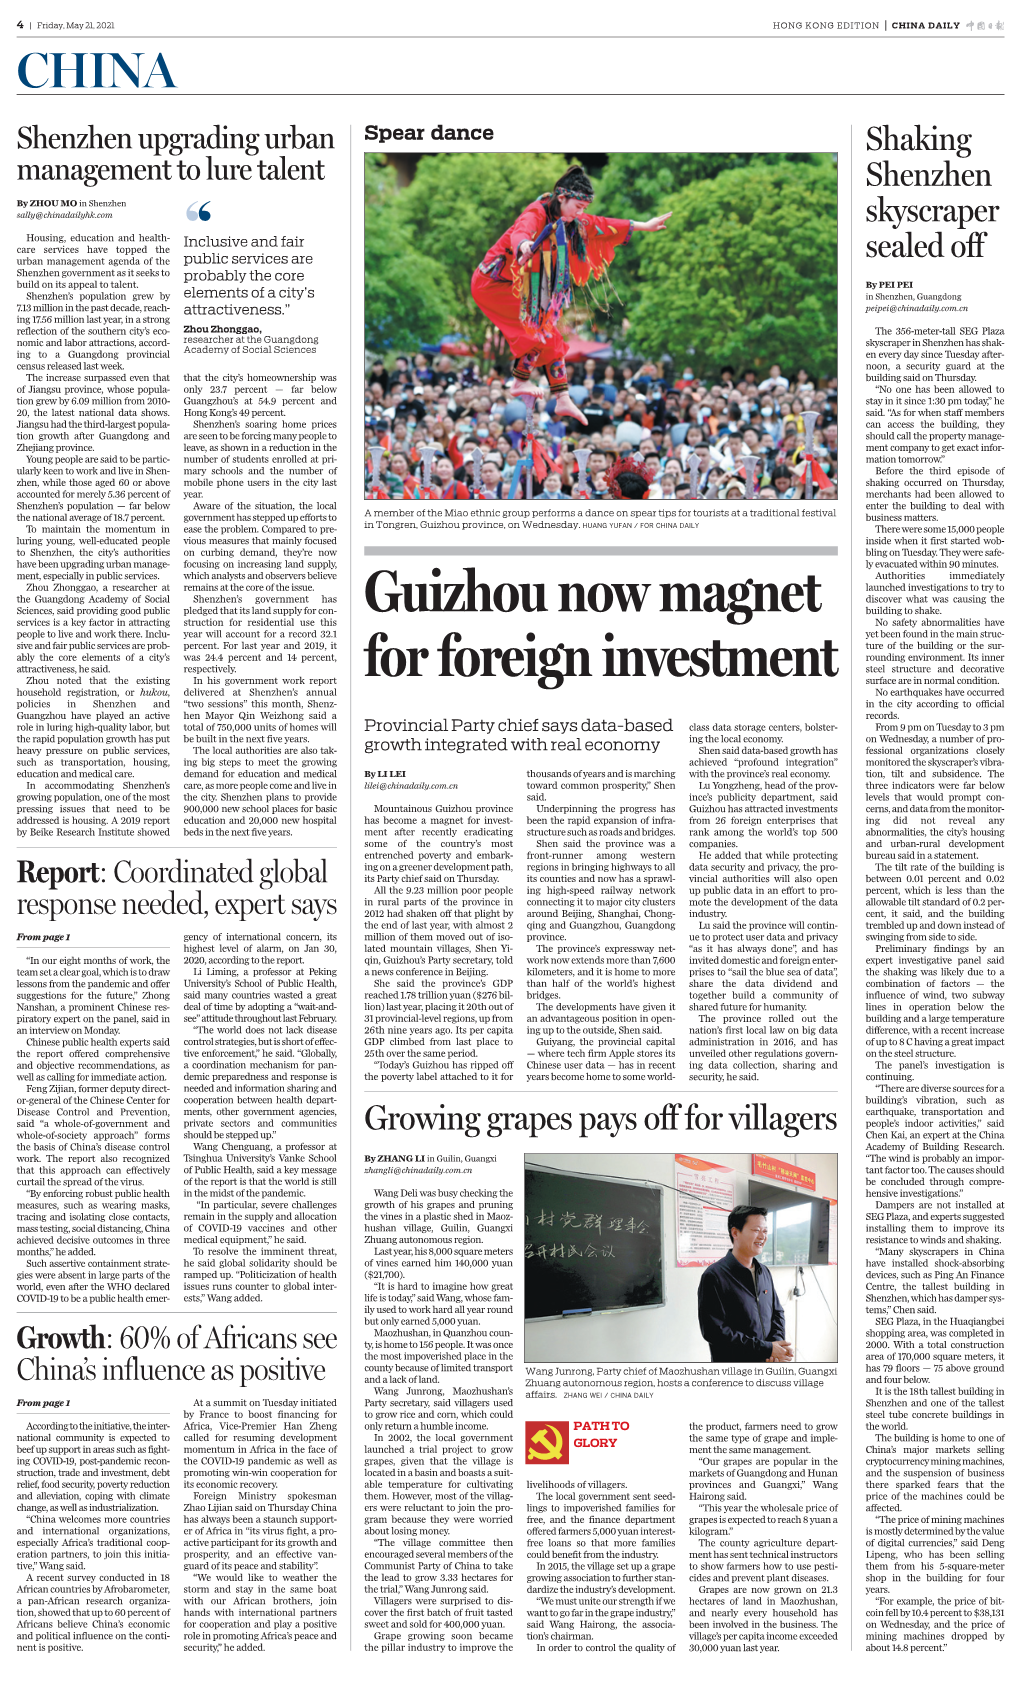 Guizhou Now Magnet for Foreign Investment